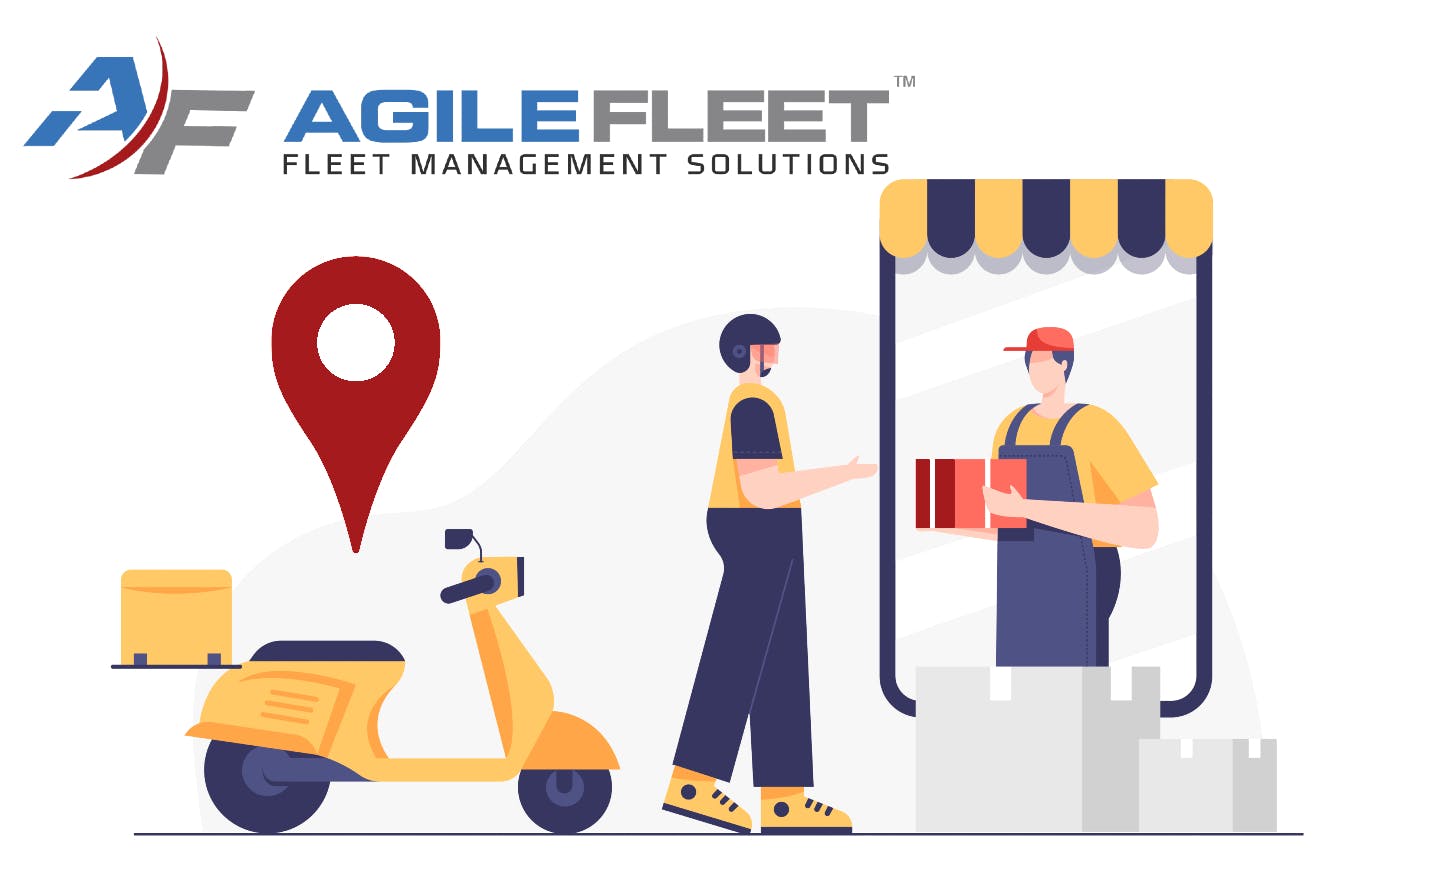 Agile Fleet: Full Review, Solutions and Services